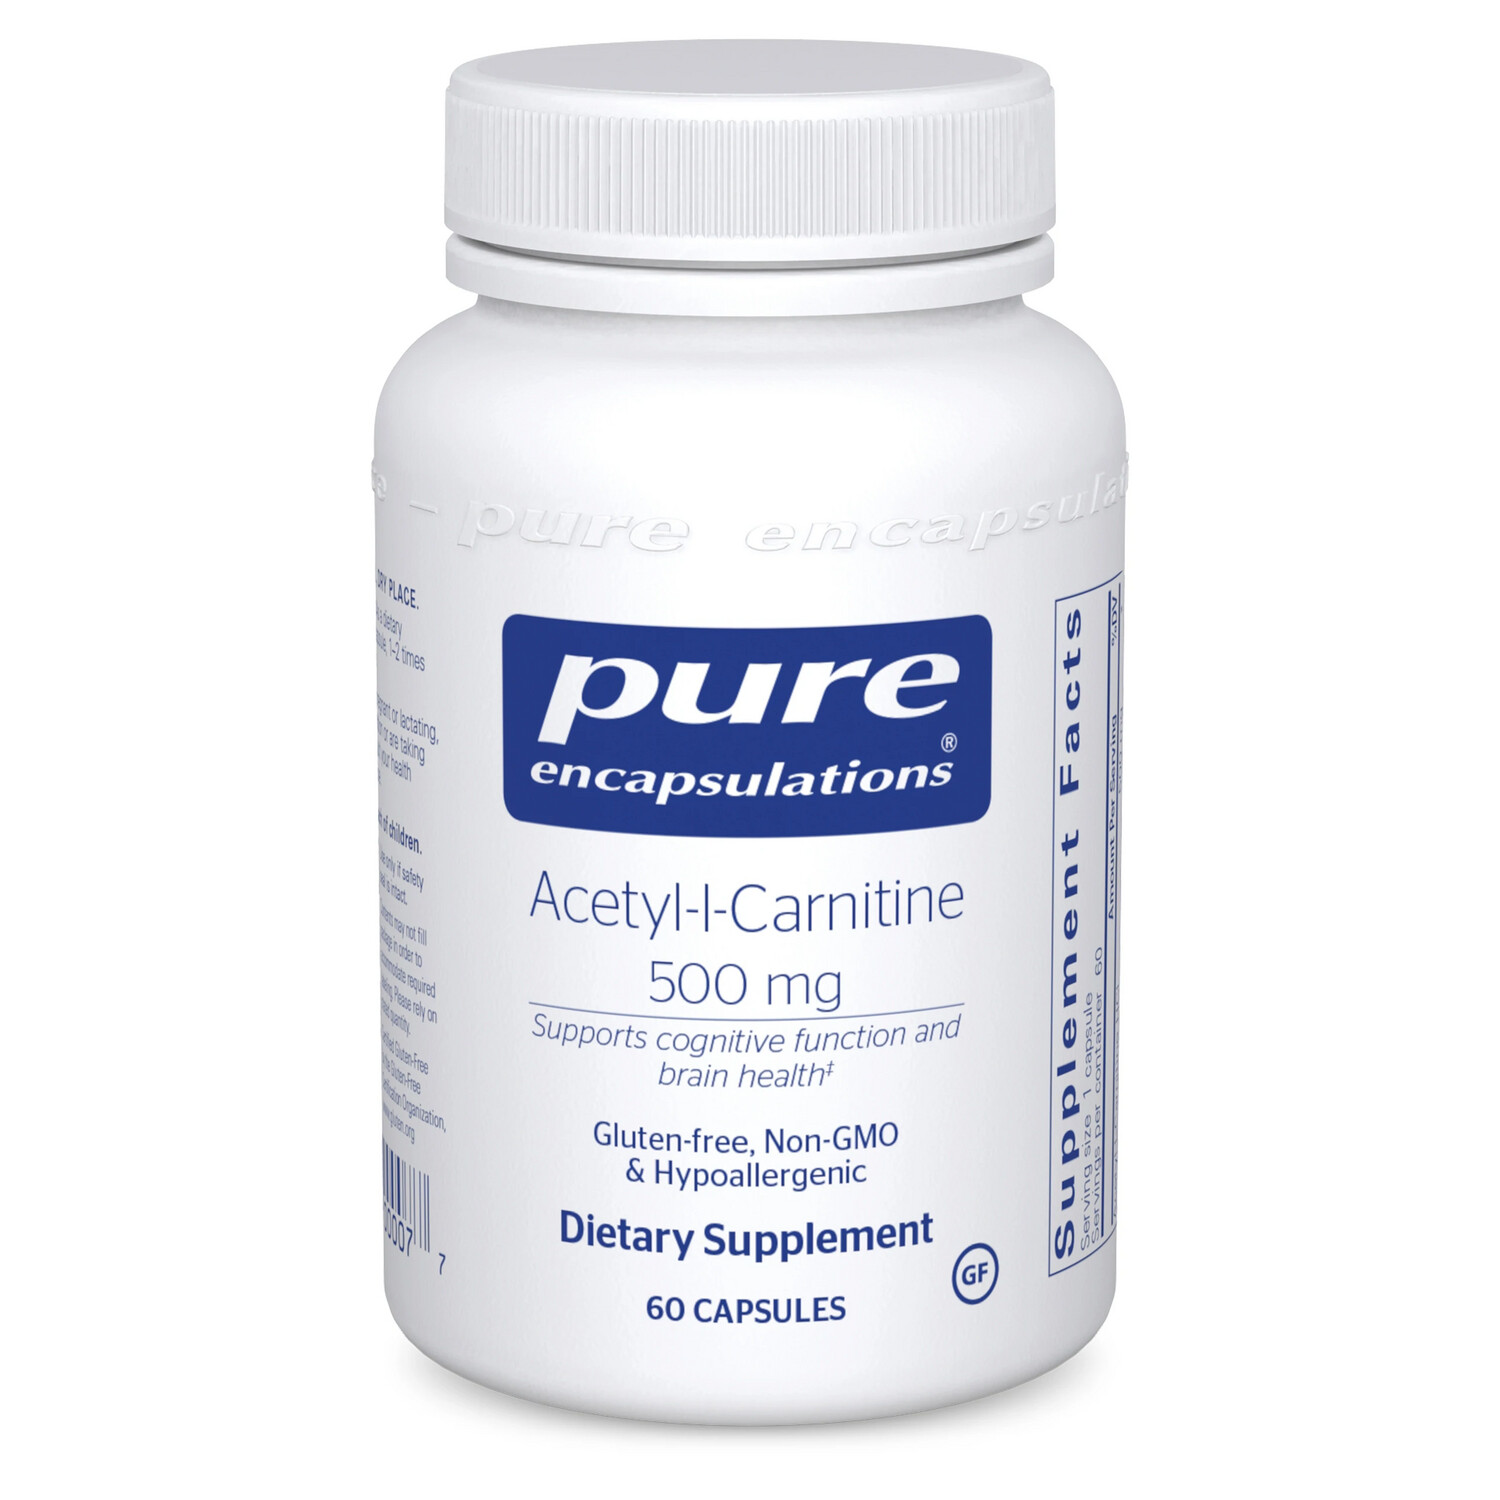 Acetyl-L-Carnitine 500 mg 60 vcaps Pure Encapsulations